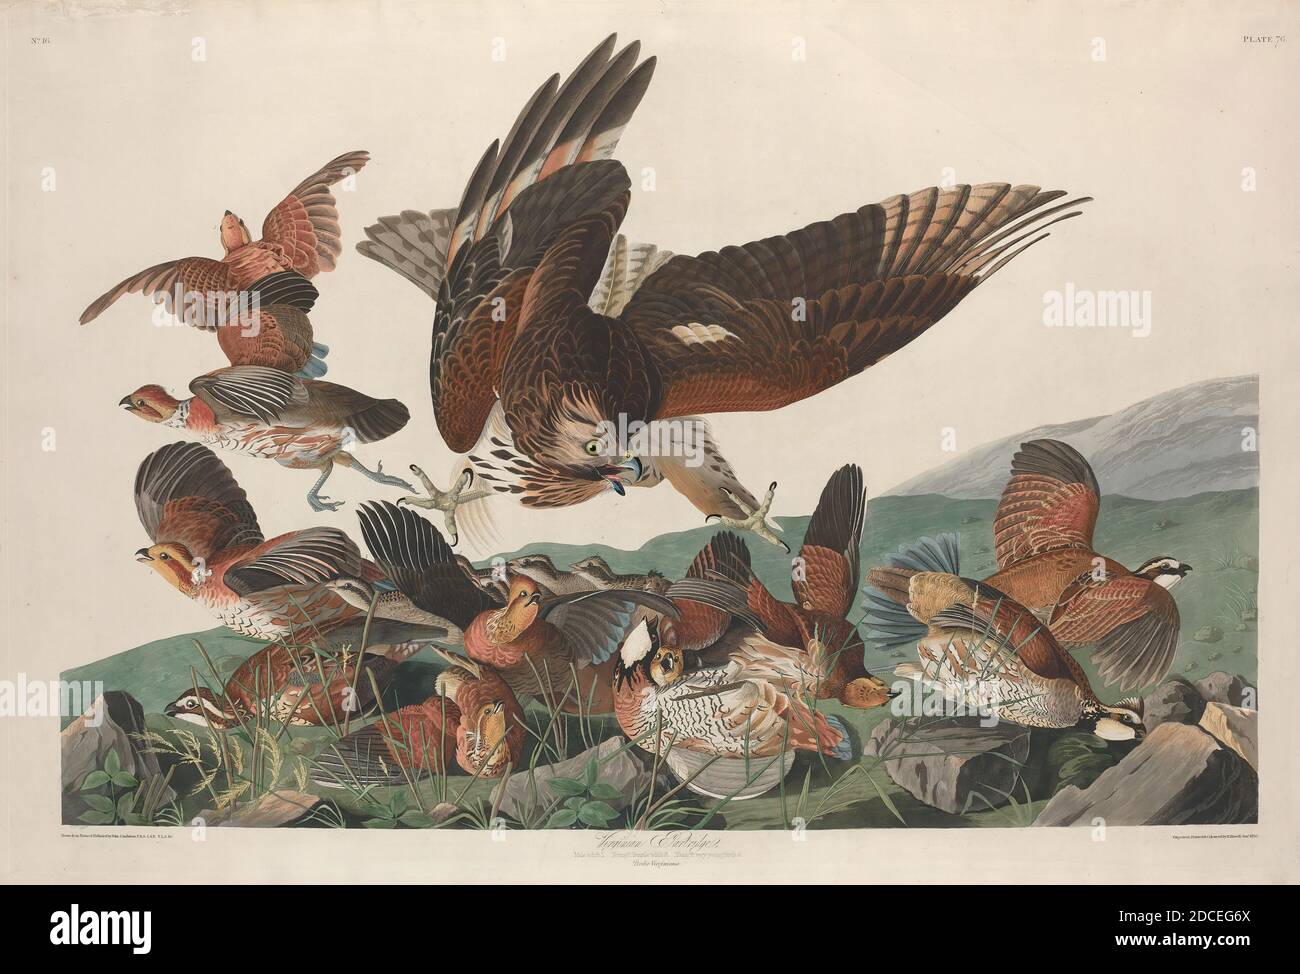 Robert Havell, Jr., (artist), American, born England, 1793 - 1878, John James Audubon, (artist after), American, 1785 - 1851, Virginian Partridge, The Birds of America: Plate LXXVI, (series), 1830, hand-colored engraving and aquatint on Whatman wove paper, plate: 64.8 x 96.8 cm (25 1/2 x 38 1/8 in.), sheet: 67 x 100.5 cm (26 3/8 x 39 9/16 in Stock Photo